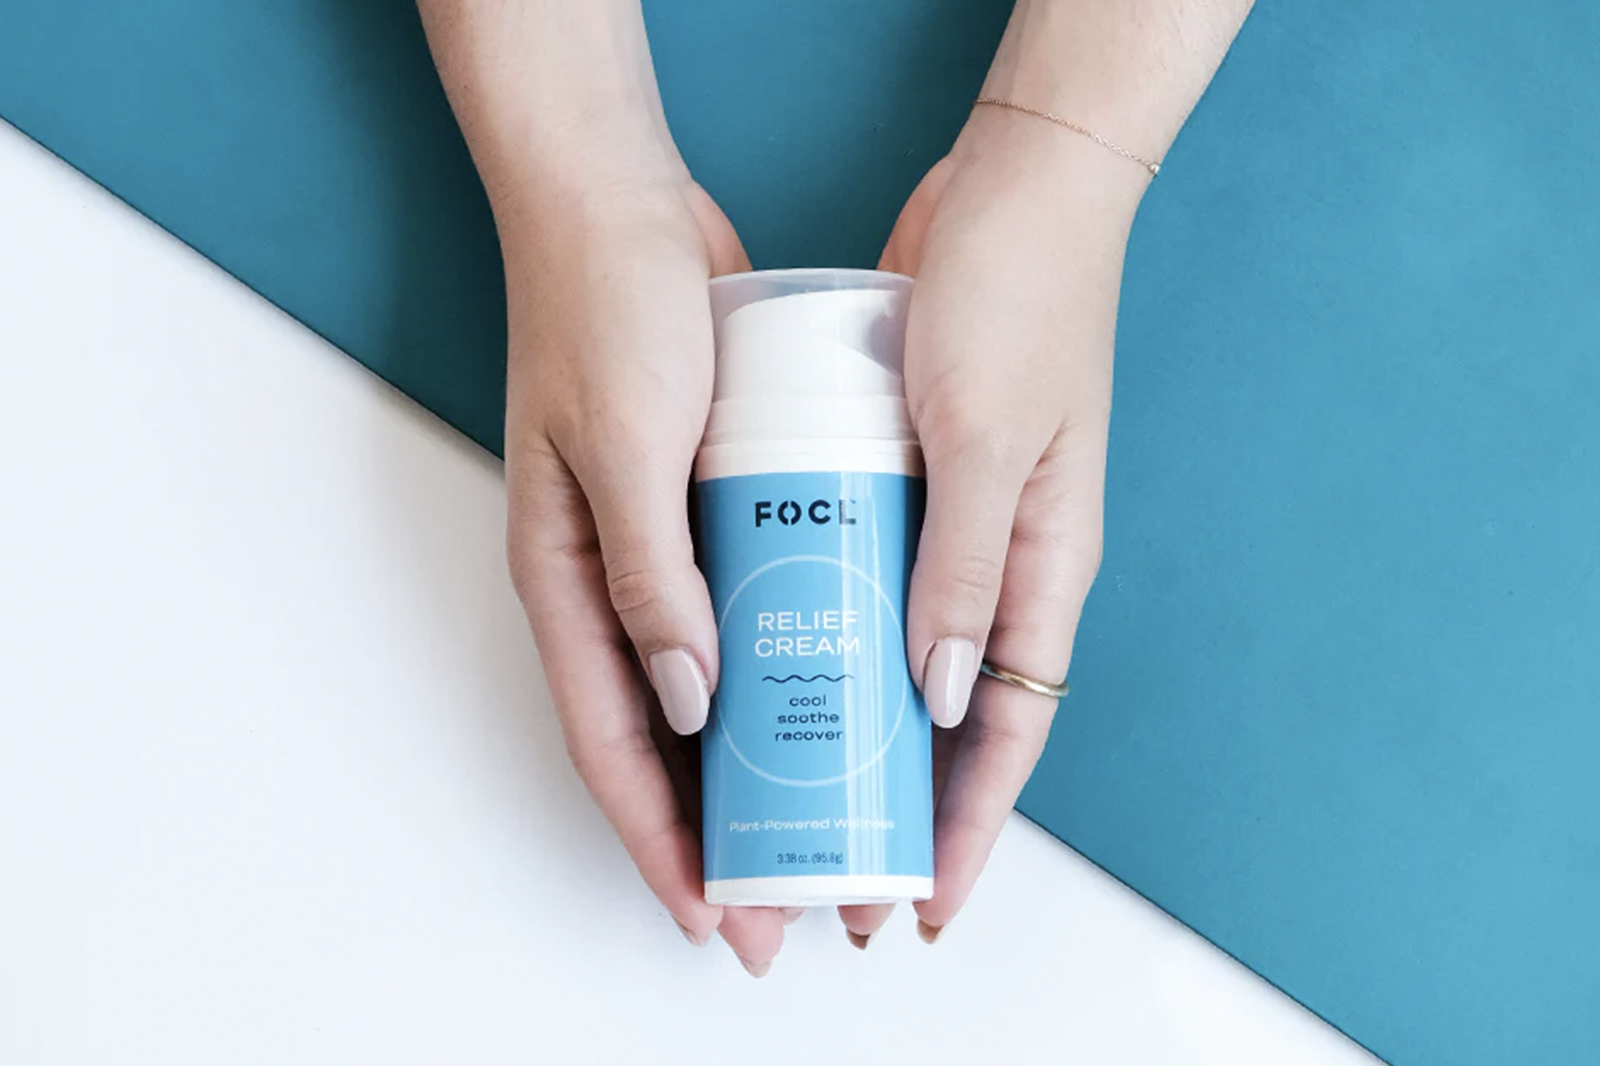 Woman's hands holding a bottle of FOCL Relief Cream.